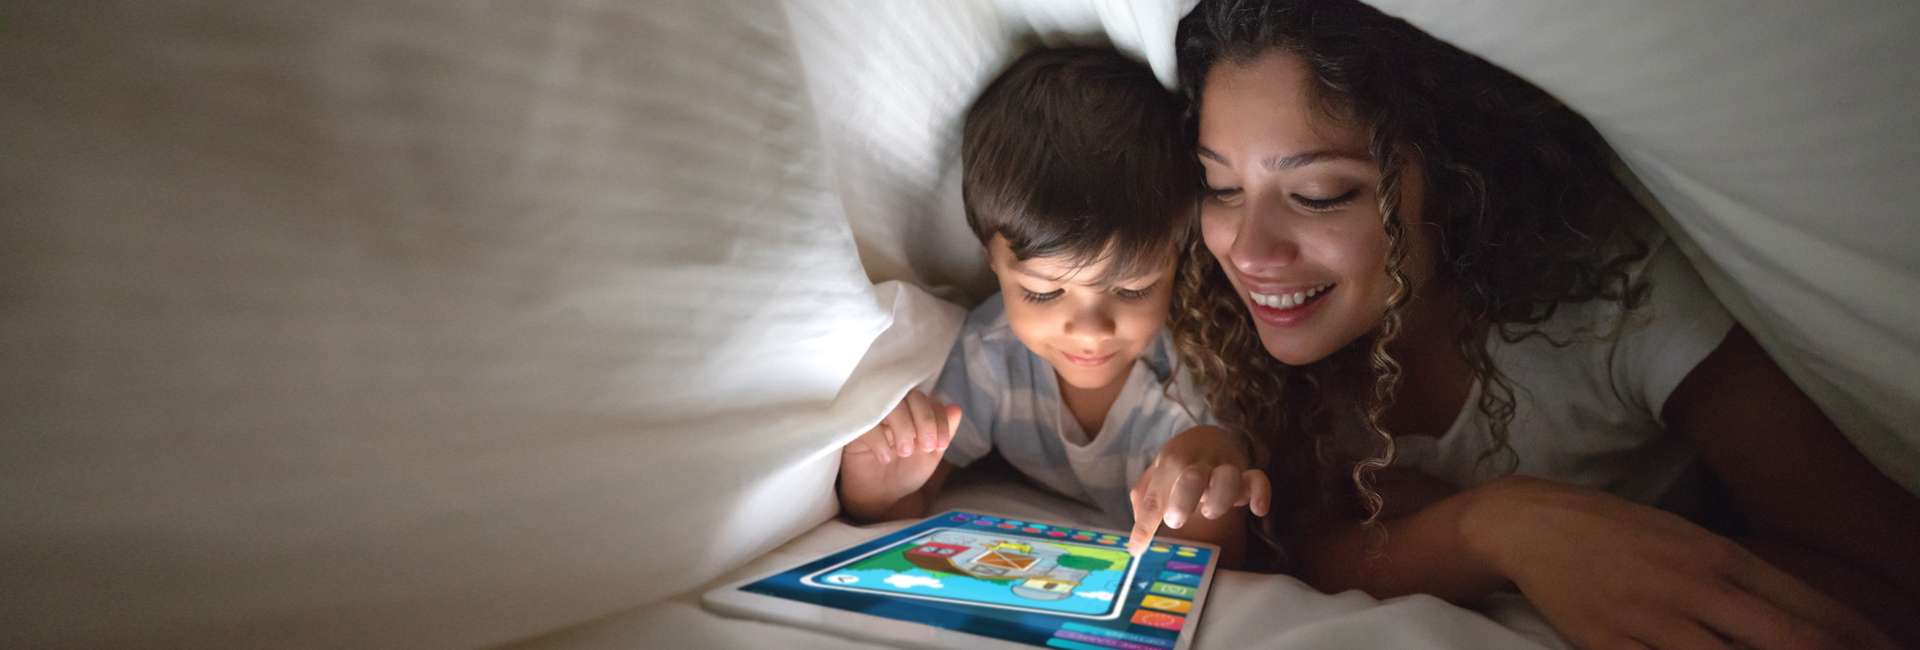 Woman and her son in a blanket fort playing on an iPad.